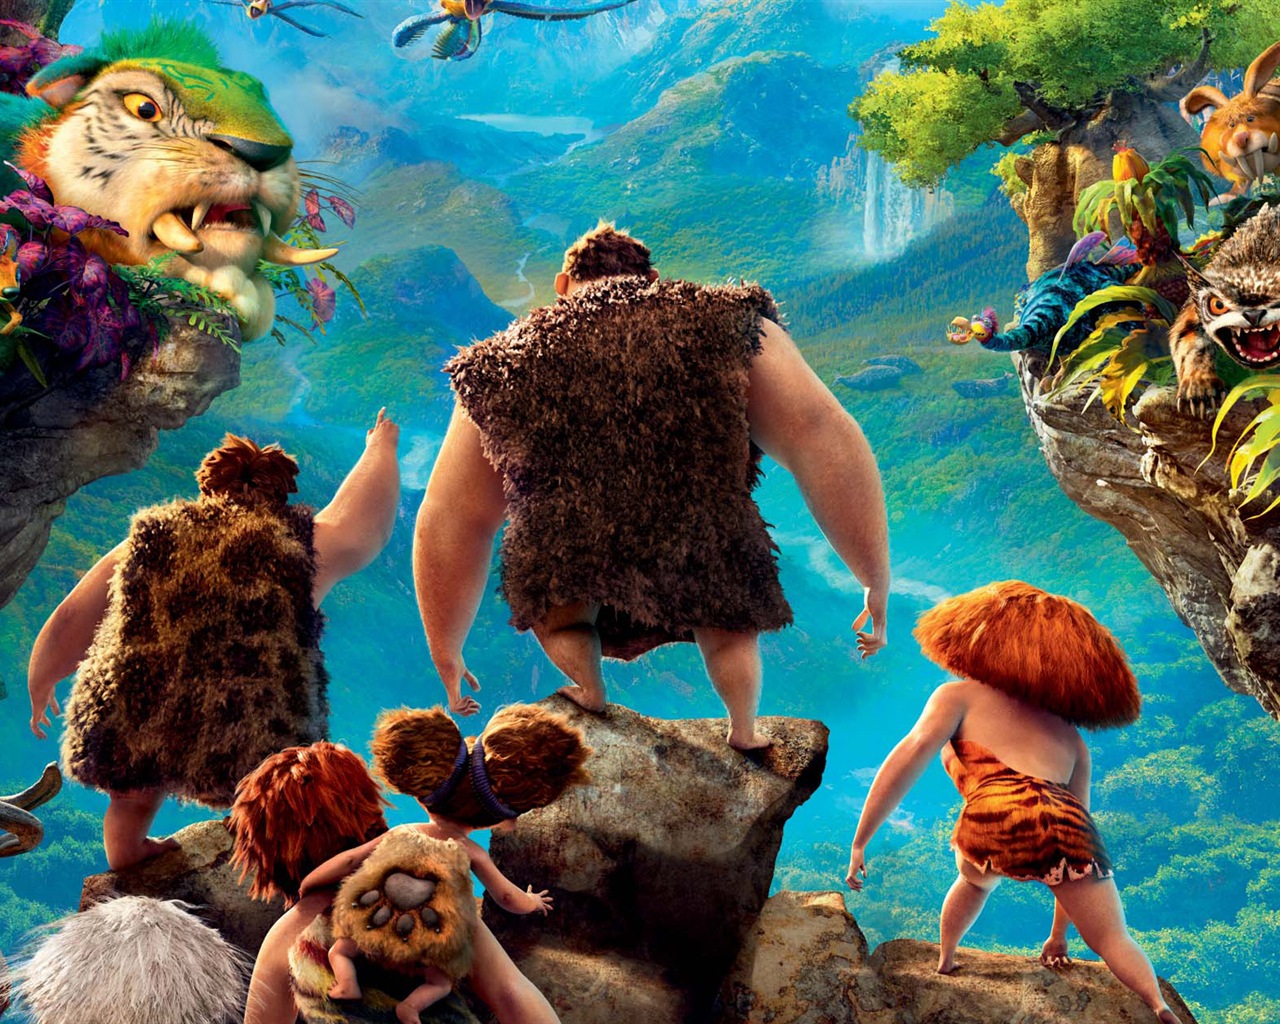 V Croods HD Movie Wallpapers #5 - 1280x1024